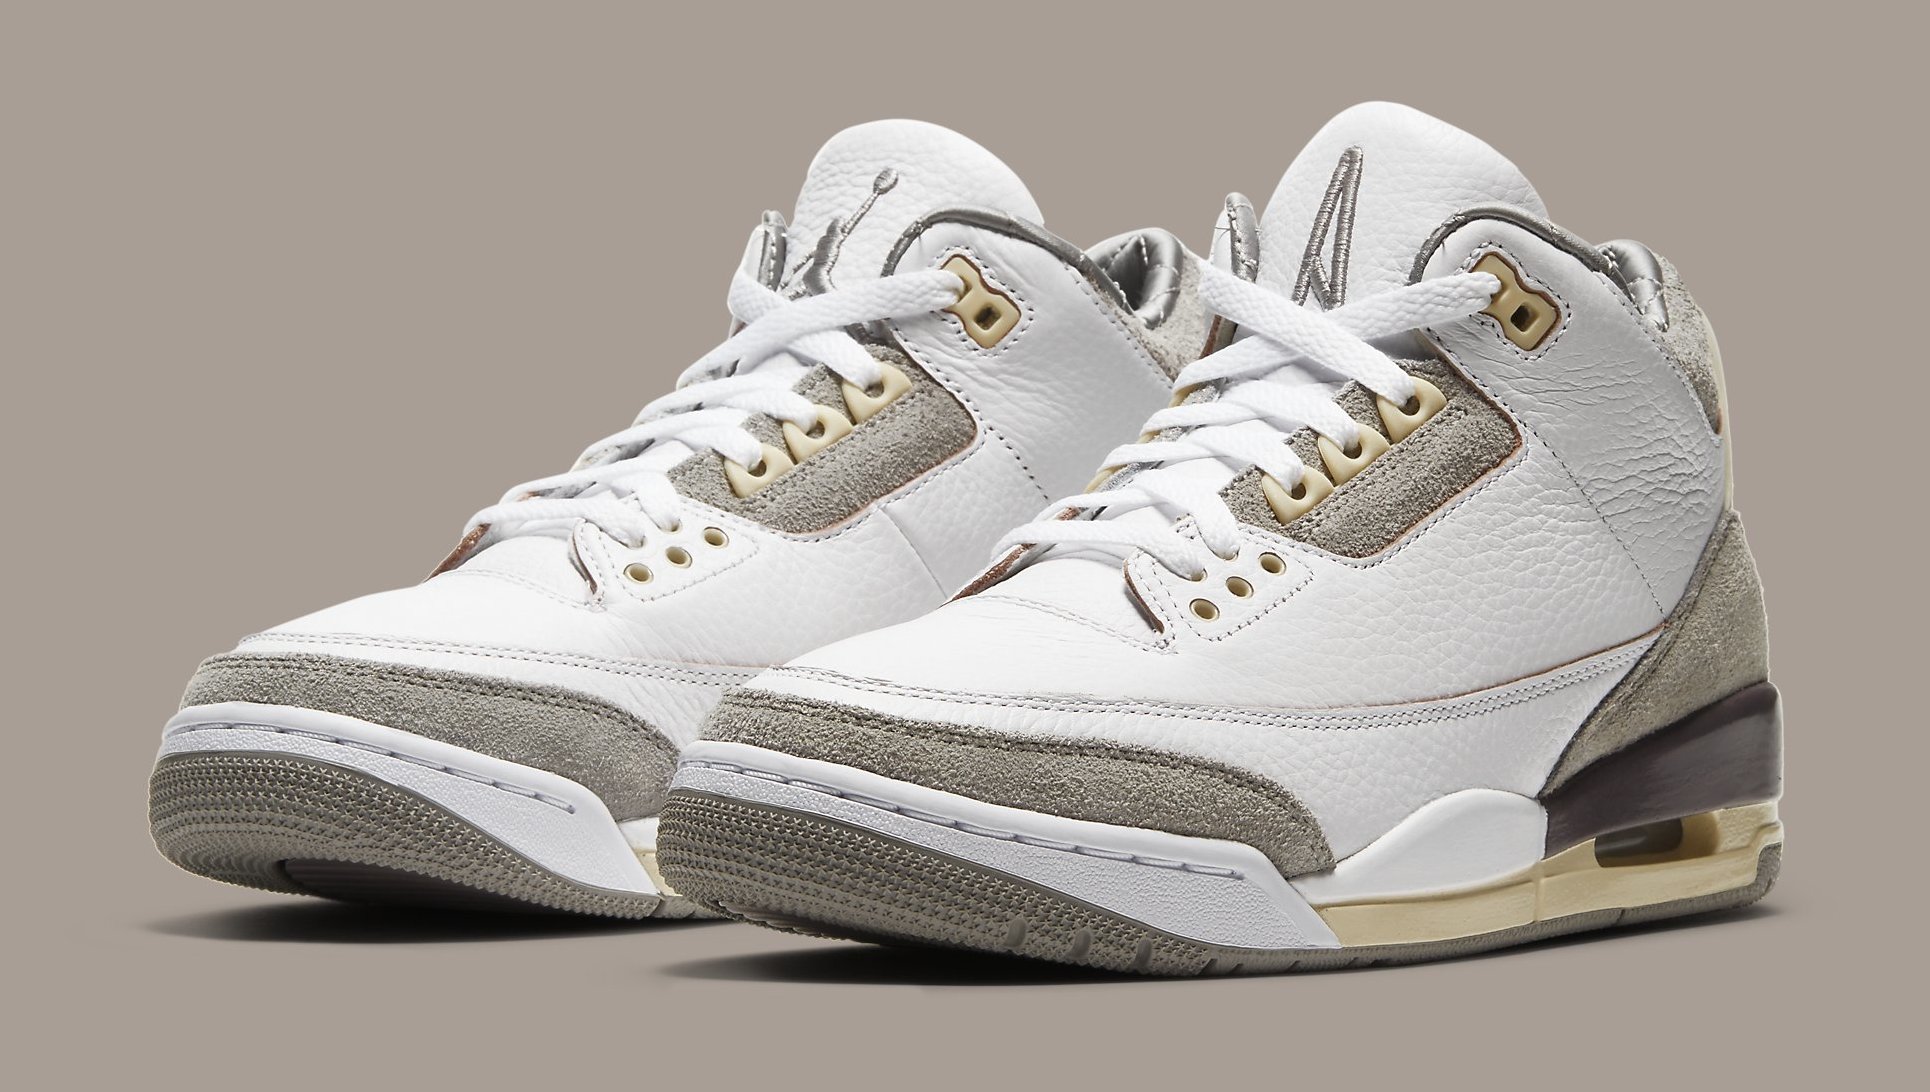 How to Buy A Ma Maniere's Air Jordan 3 'Raised by Women' Collab